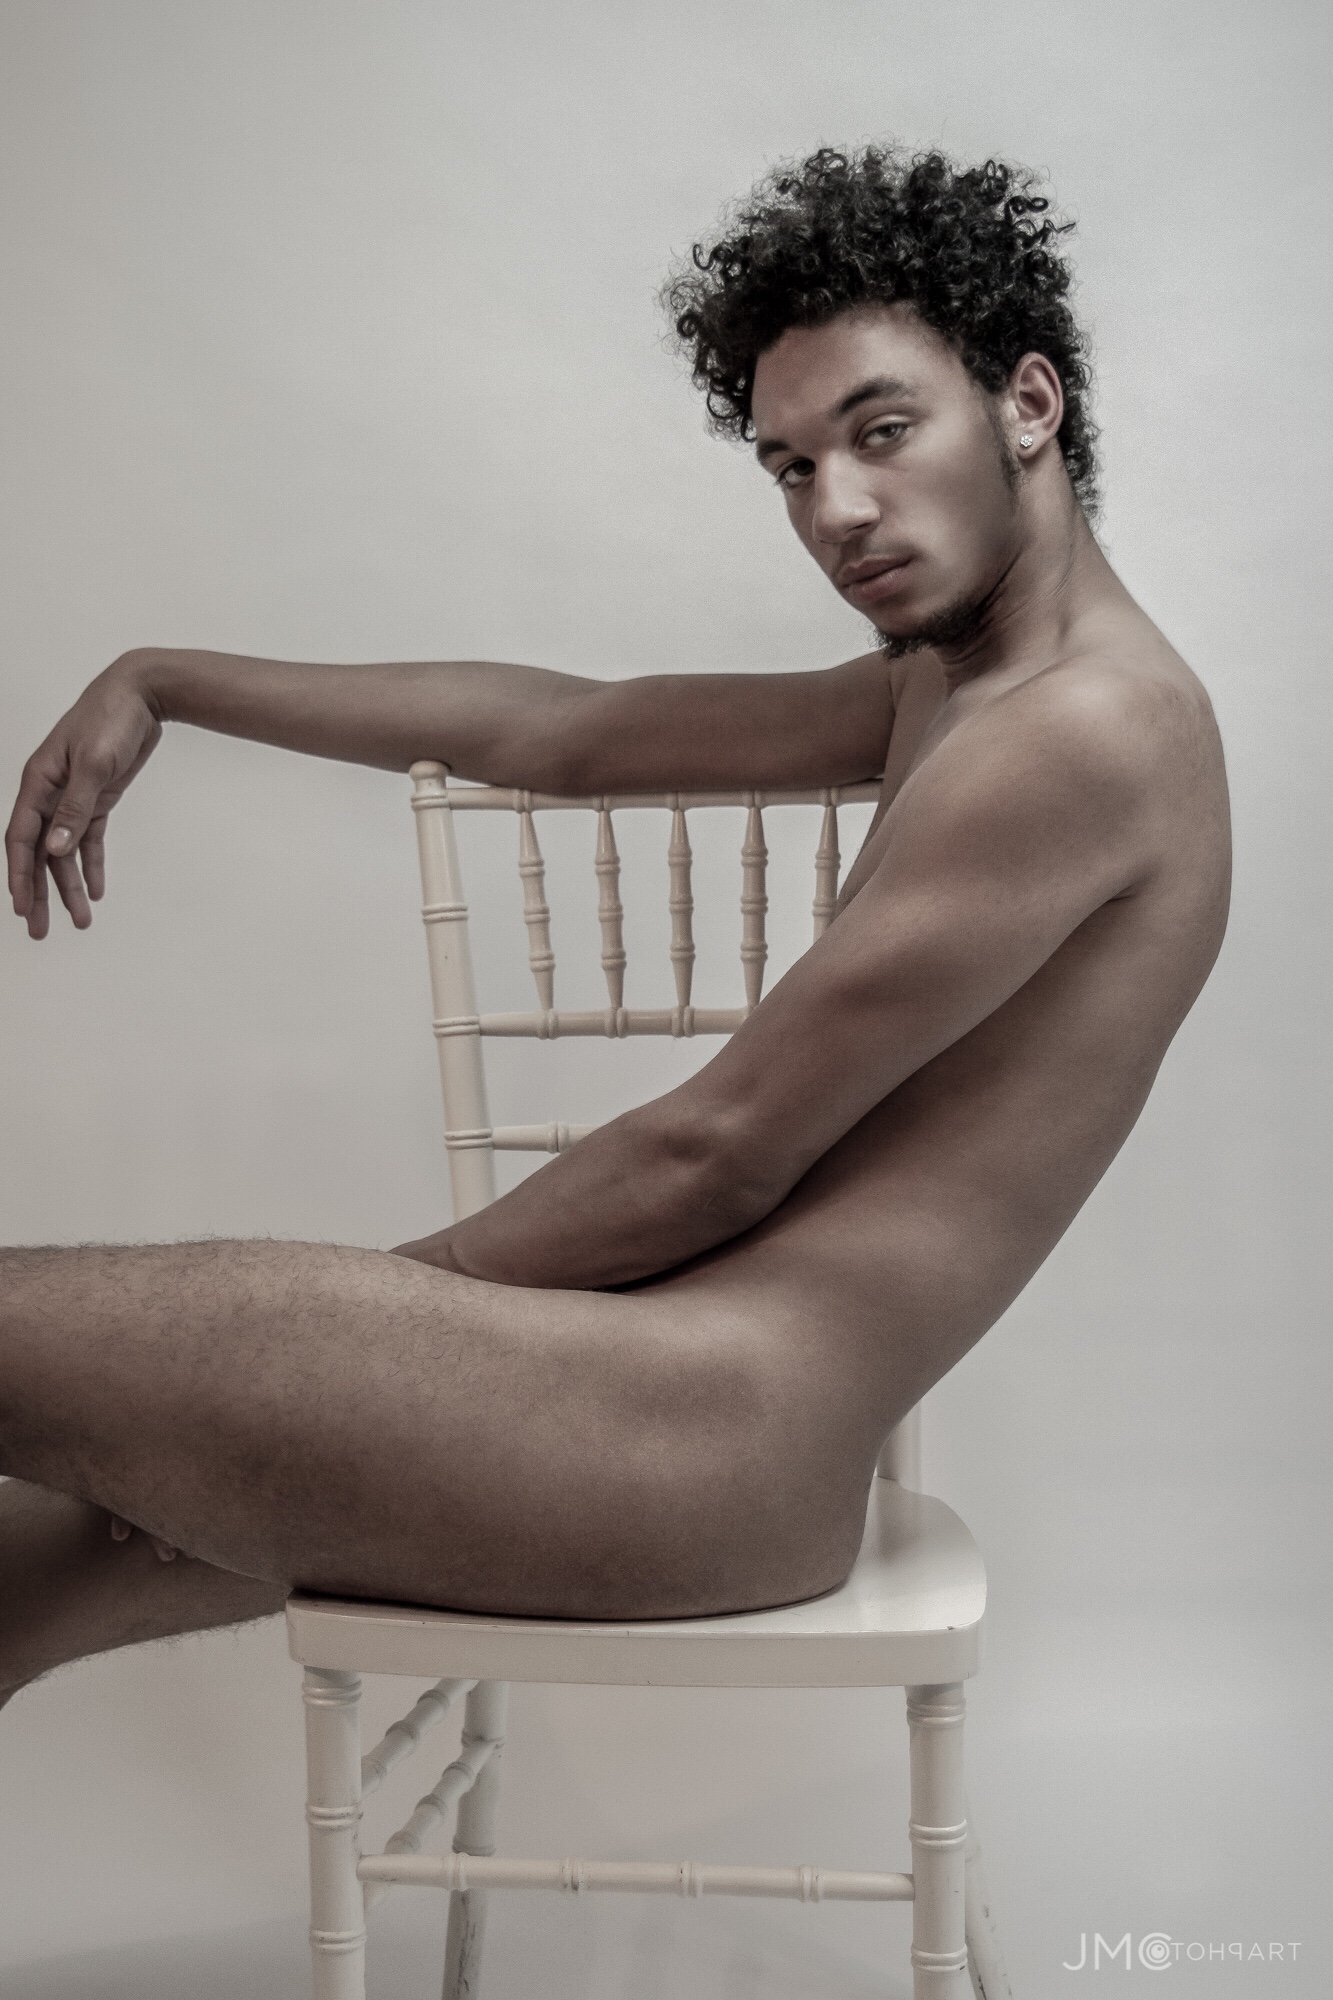 – EXCLUSIVE – NSFW – Z. By Jonathan Christian